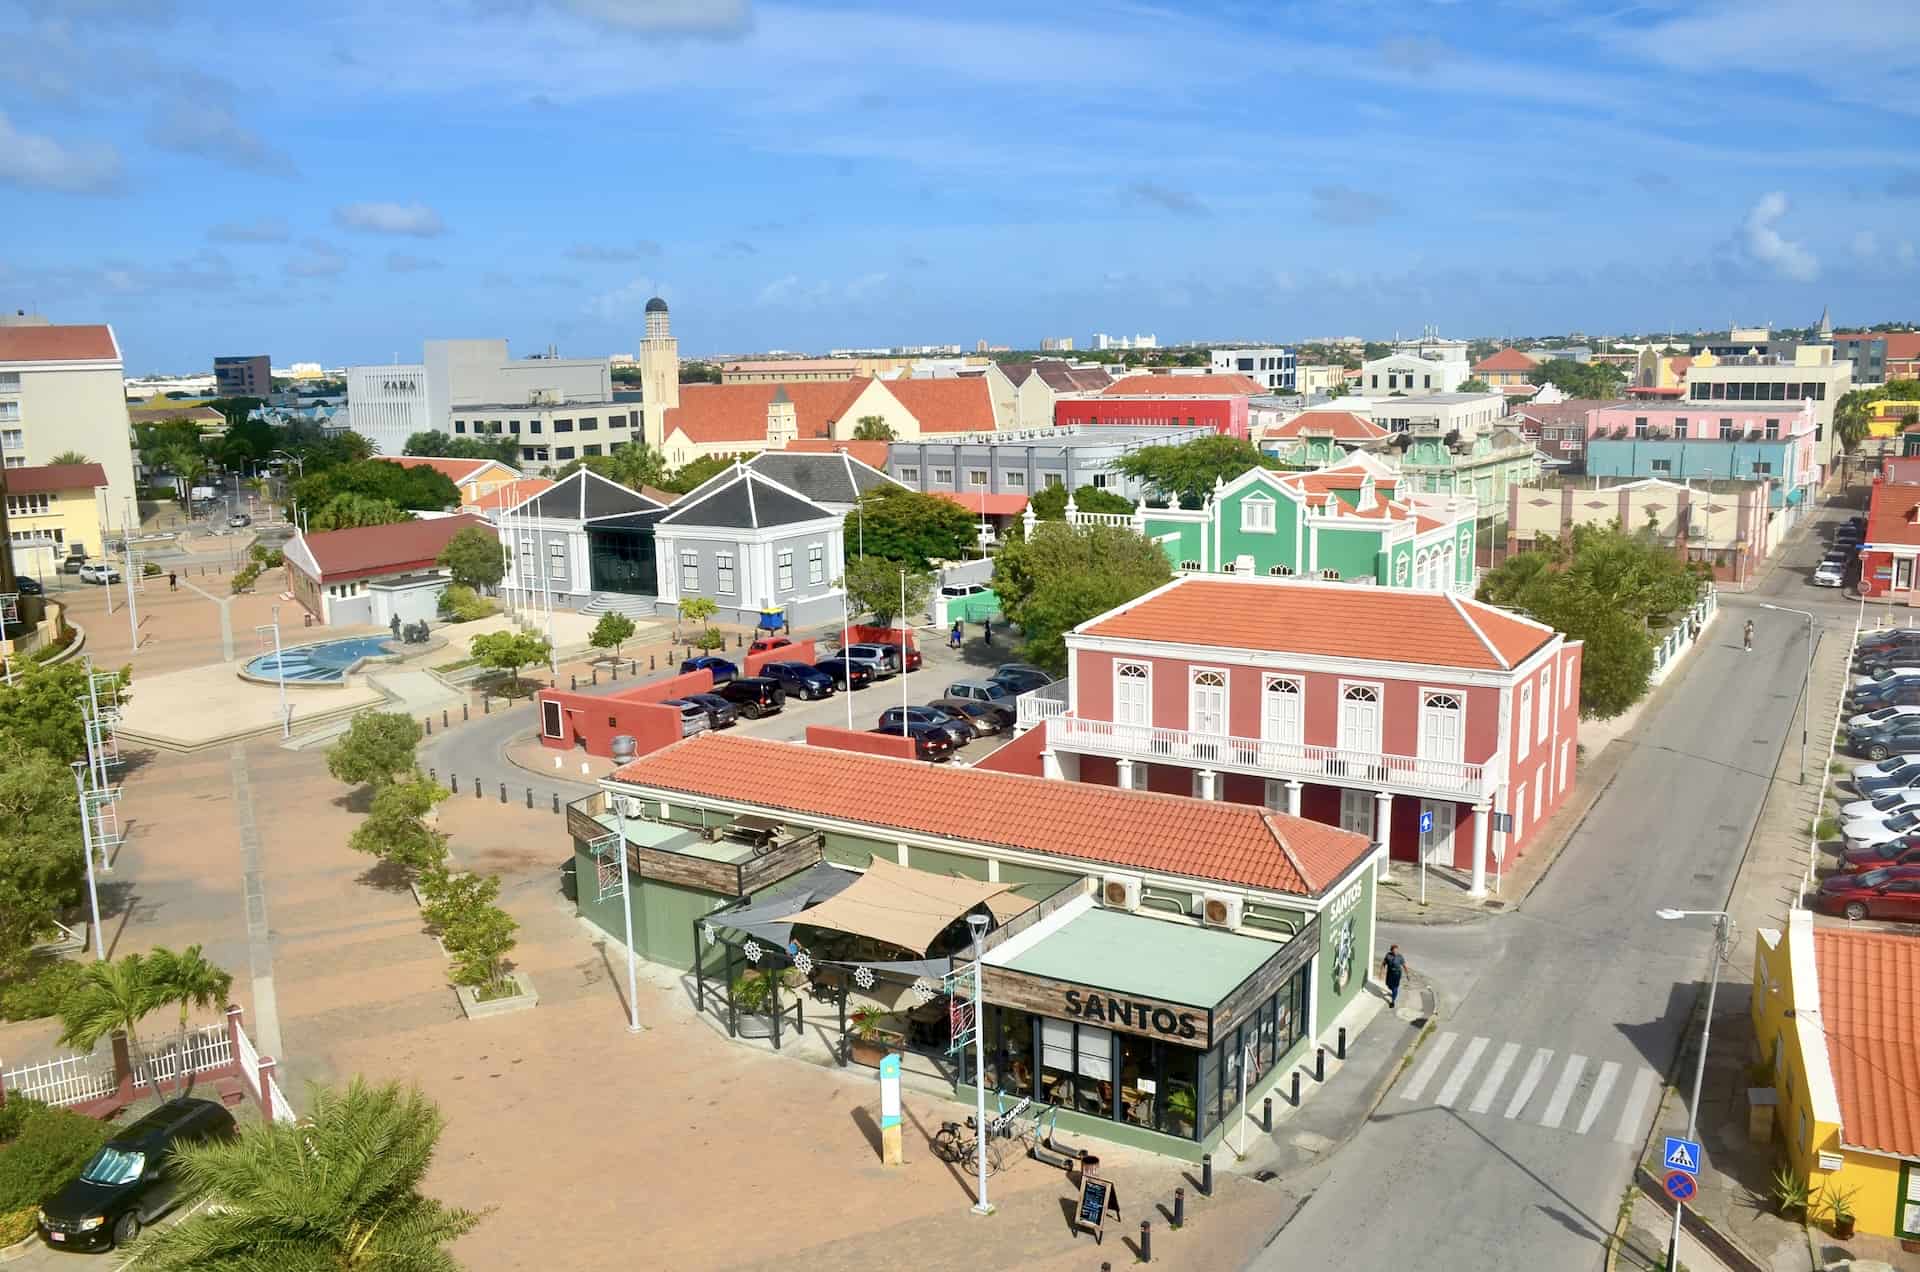 Oranjestad from the Willem III Tower at the Historical Museum of Aruba in Oranjestad